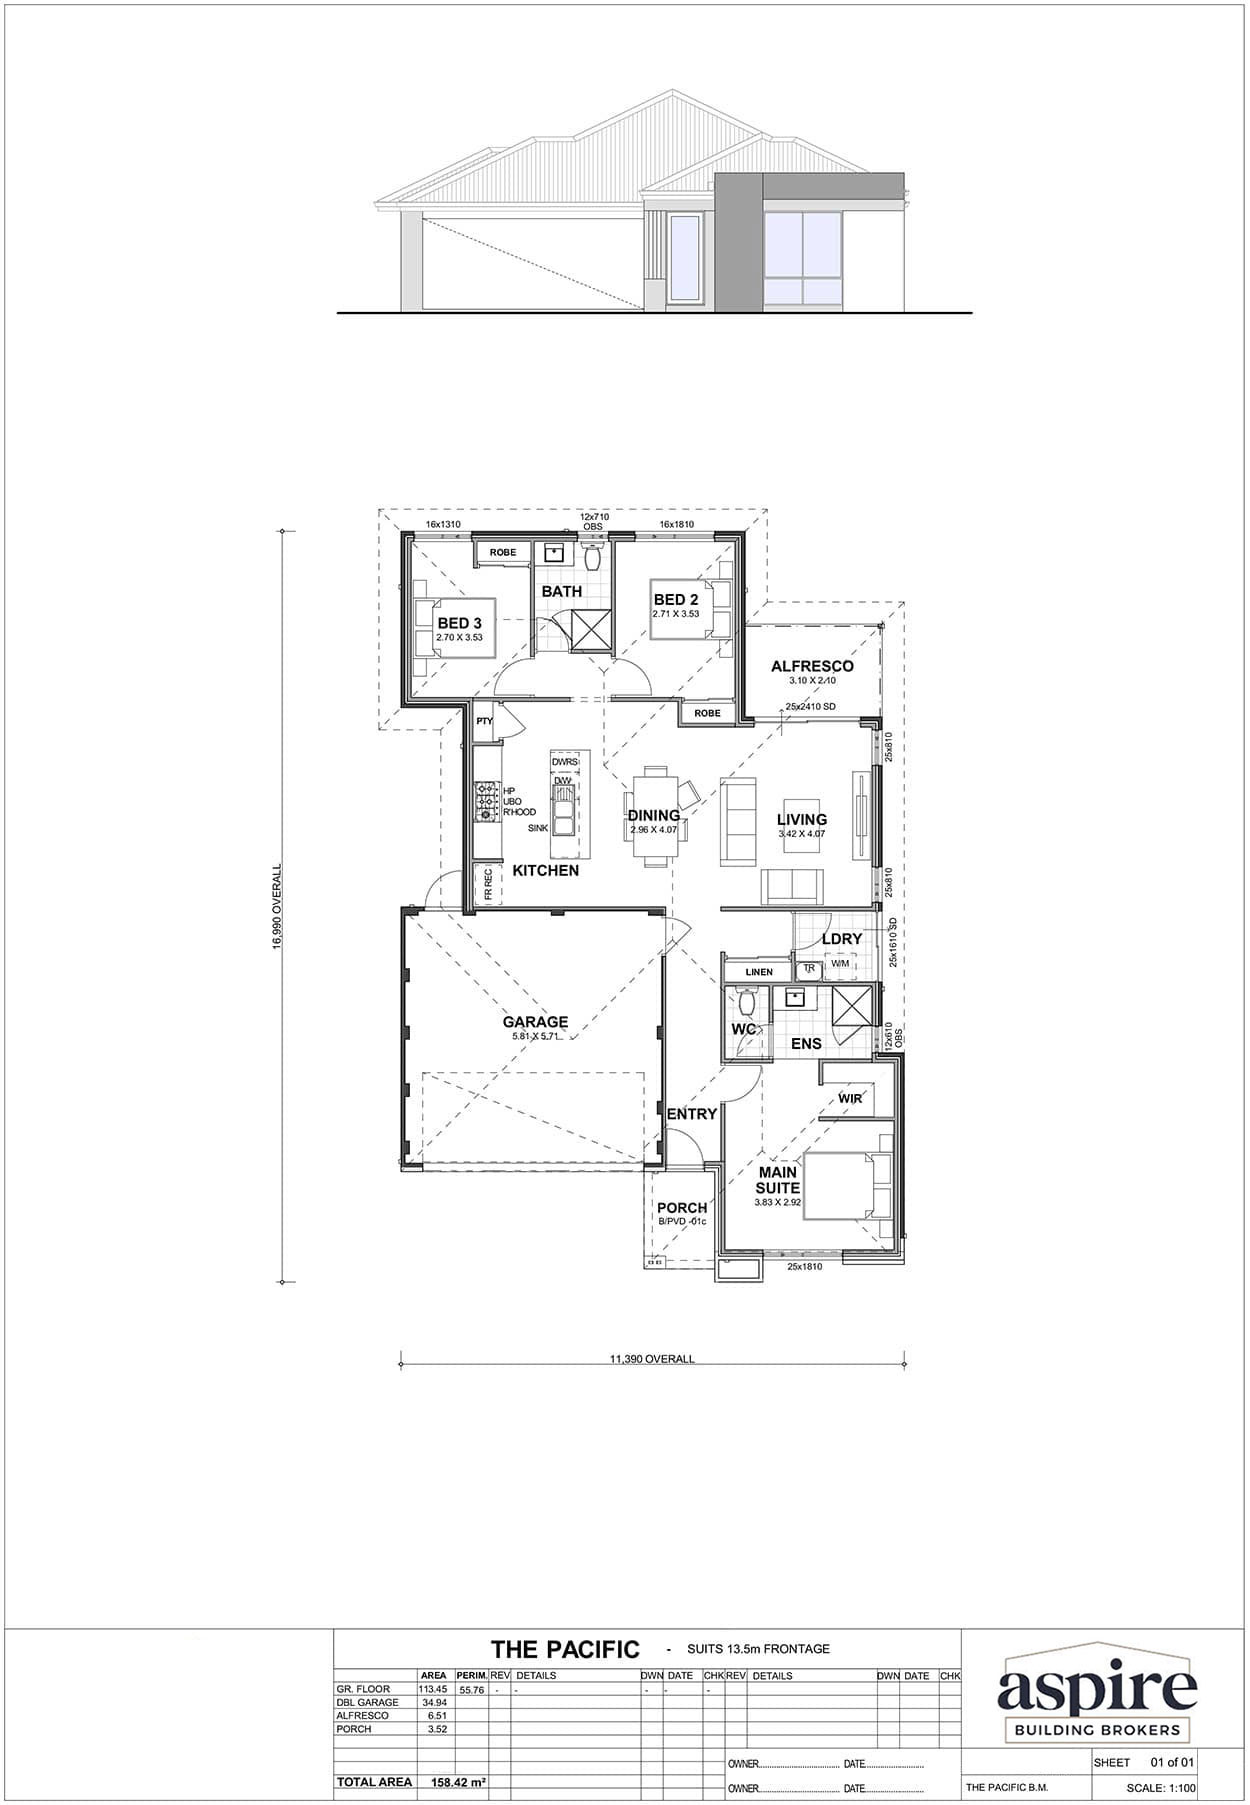 The Pacific Floor Plan - Perth New Build Home Designs. 3 Bedrooms and 13.5m Block Width. Aspire Building Brokers